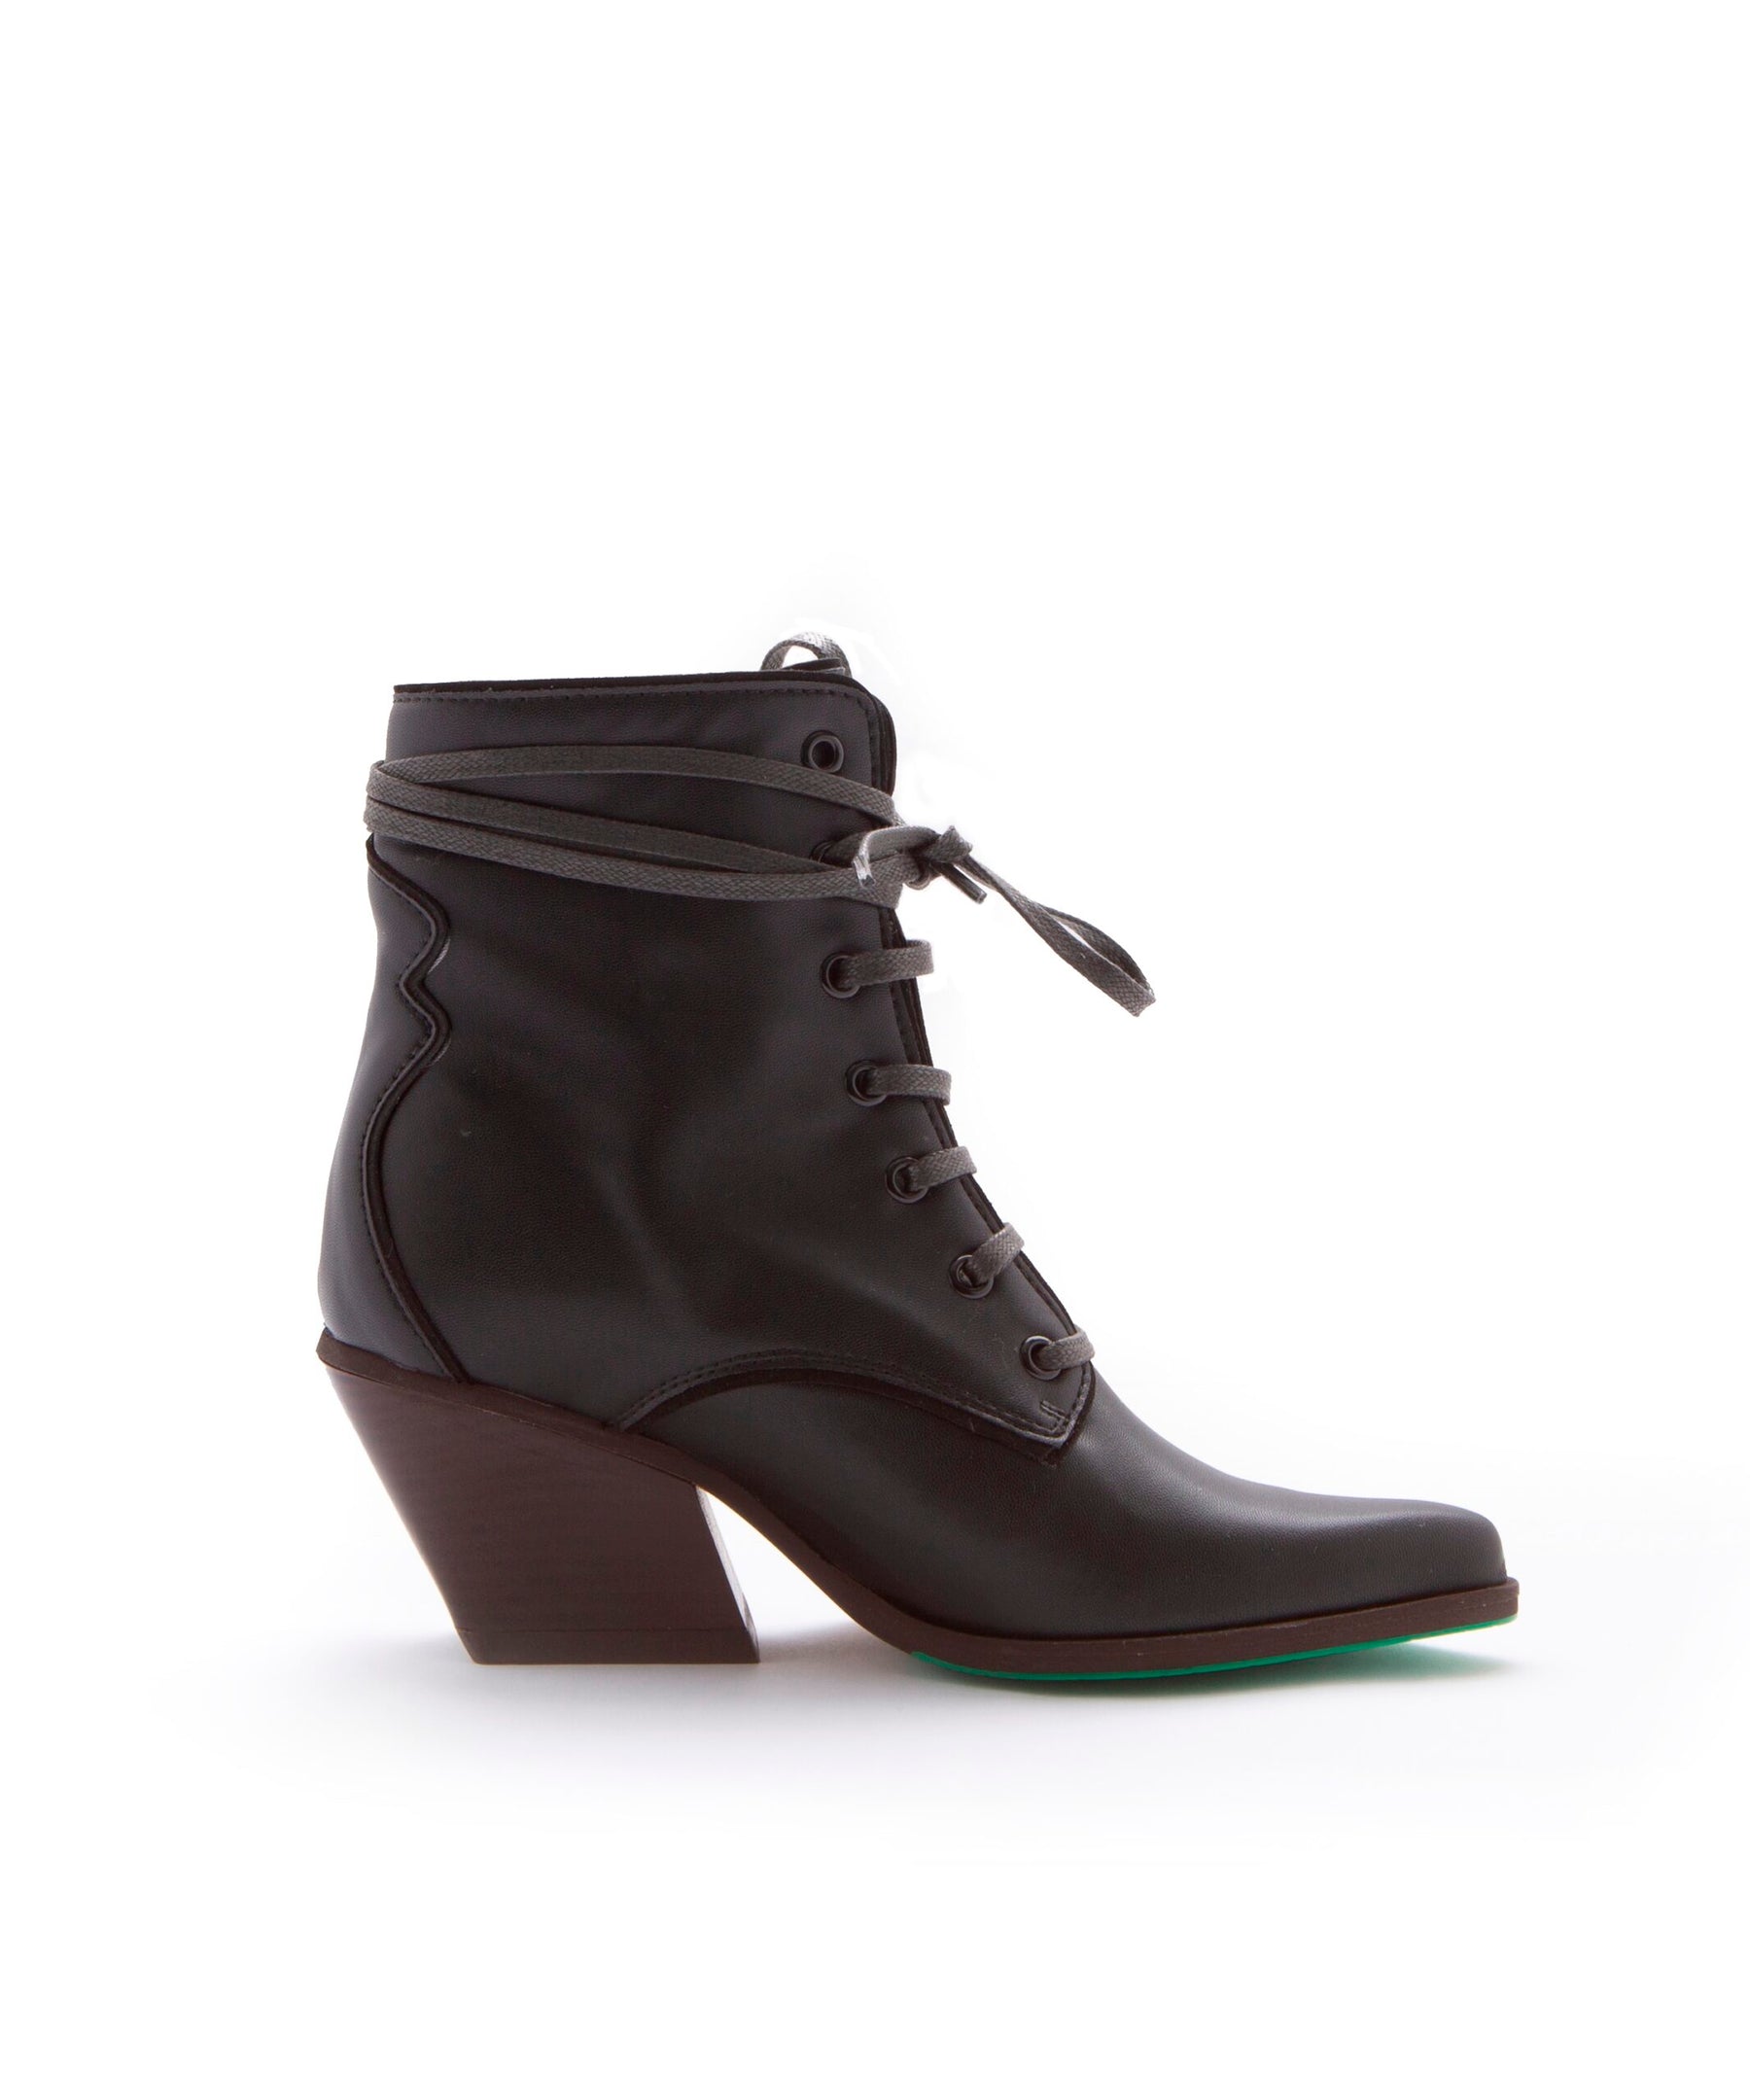 western inspired vegan leather ankle boots with laces